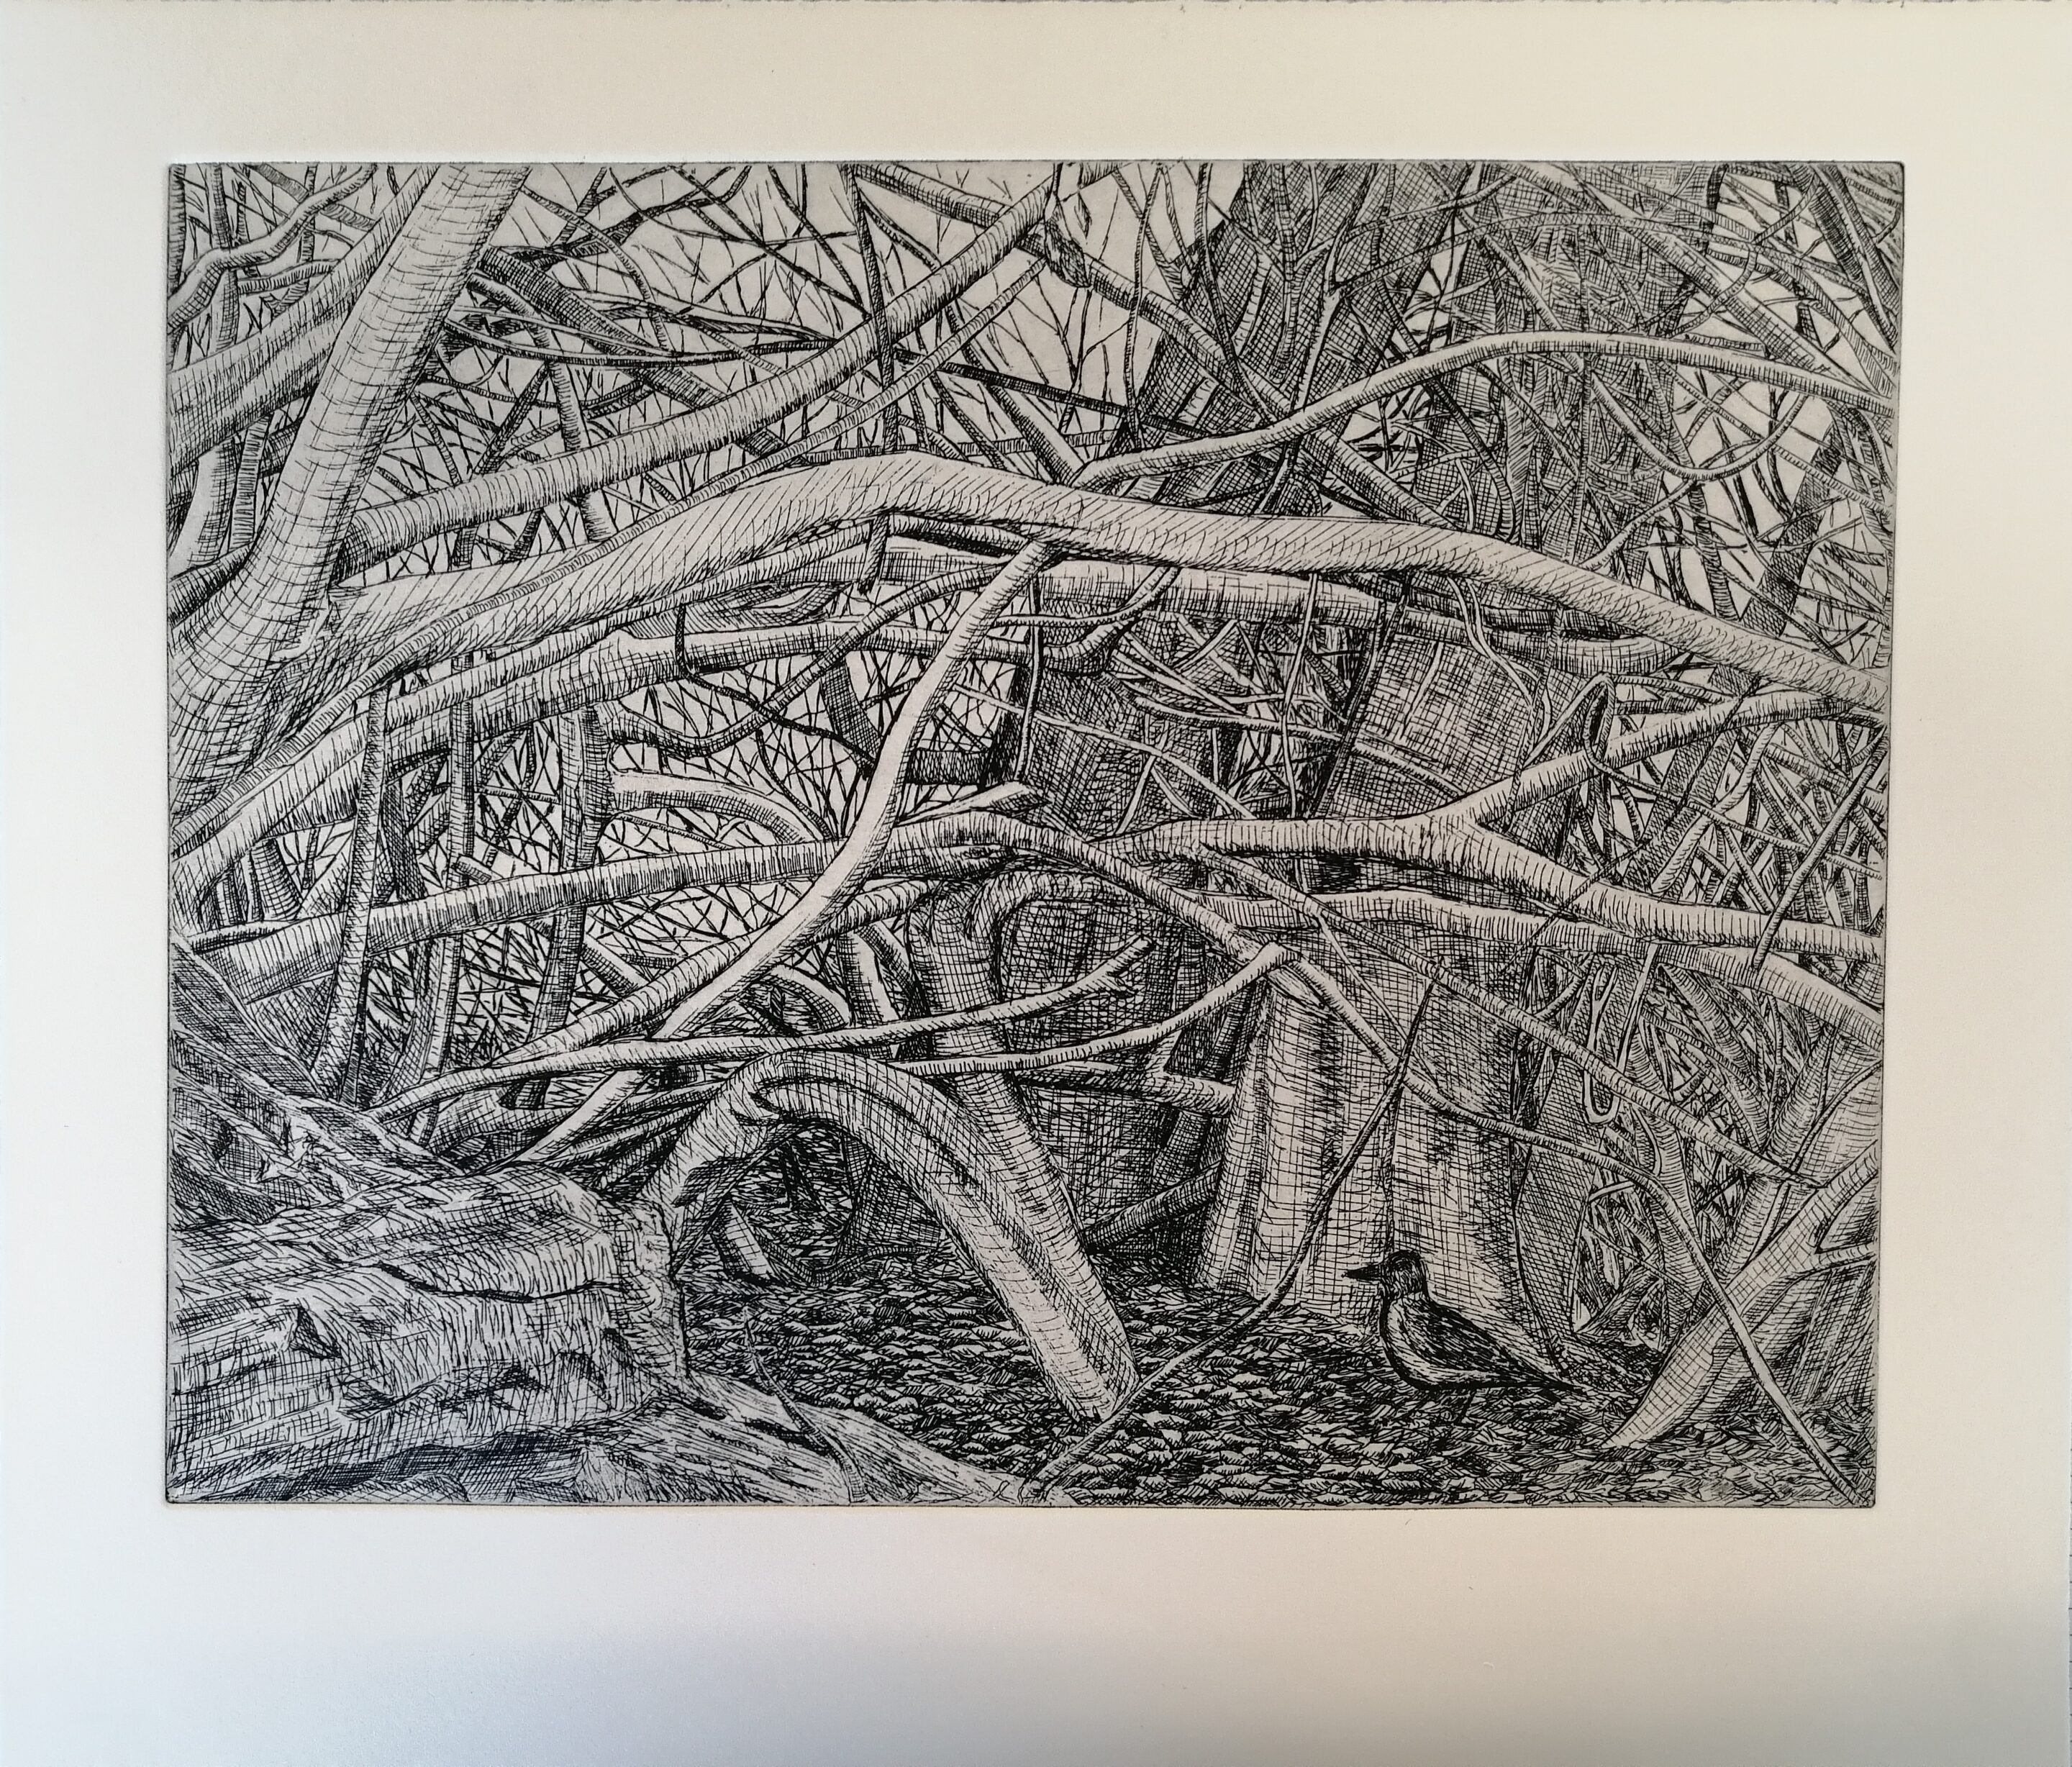 Eimhin Farrell, Tangled Branches with Hooded Crow, Etching, 38 x 33cm, €300